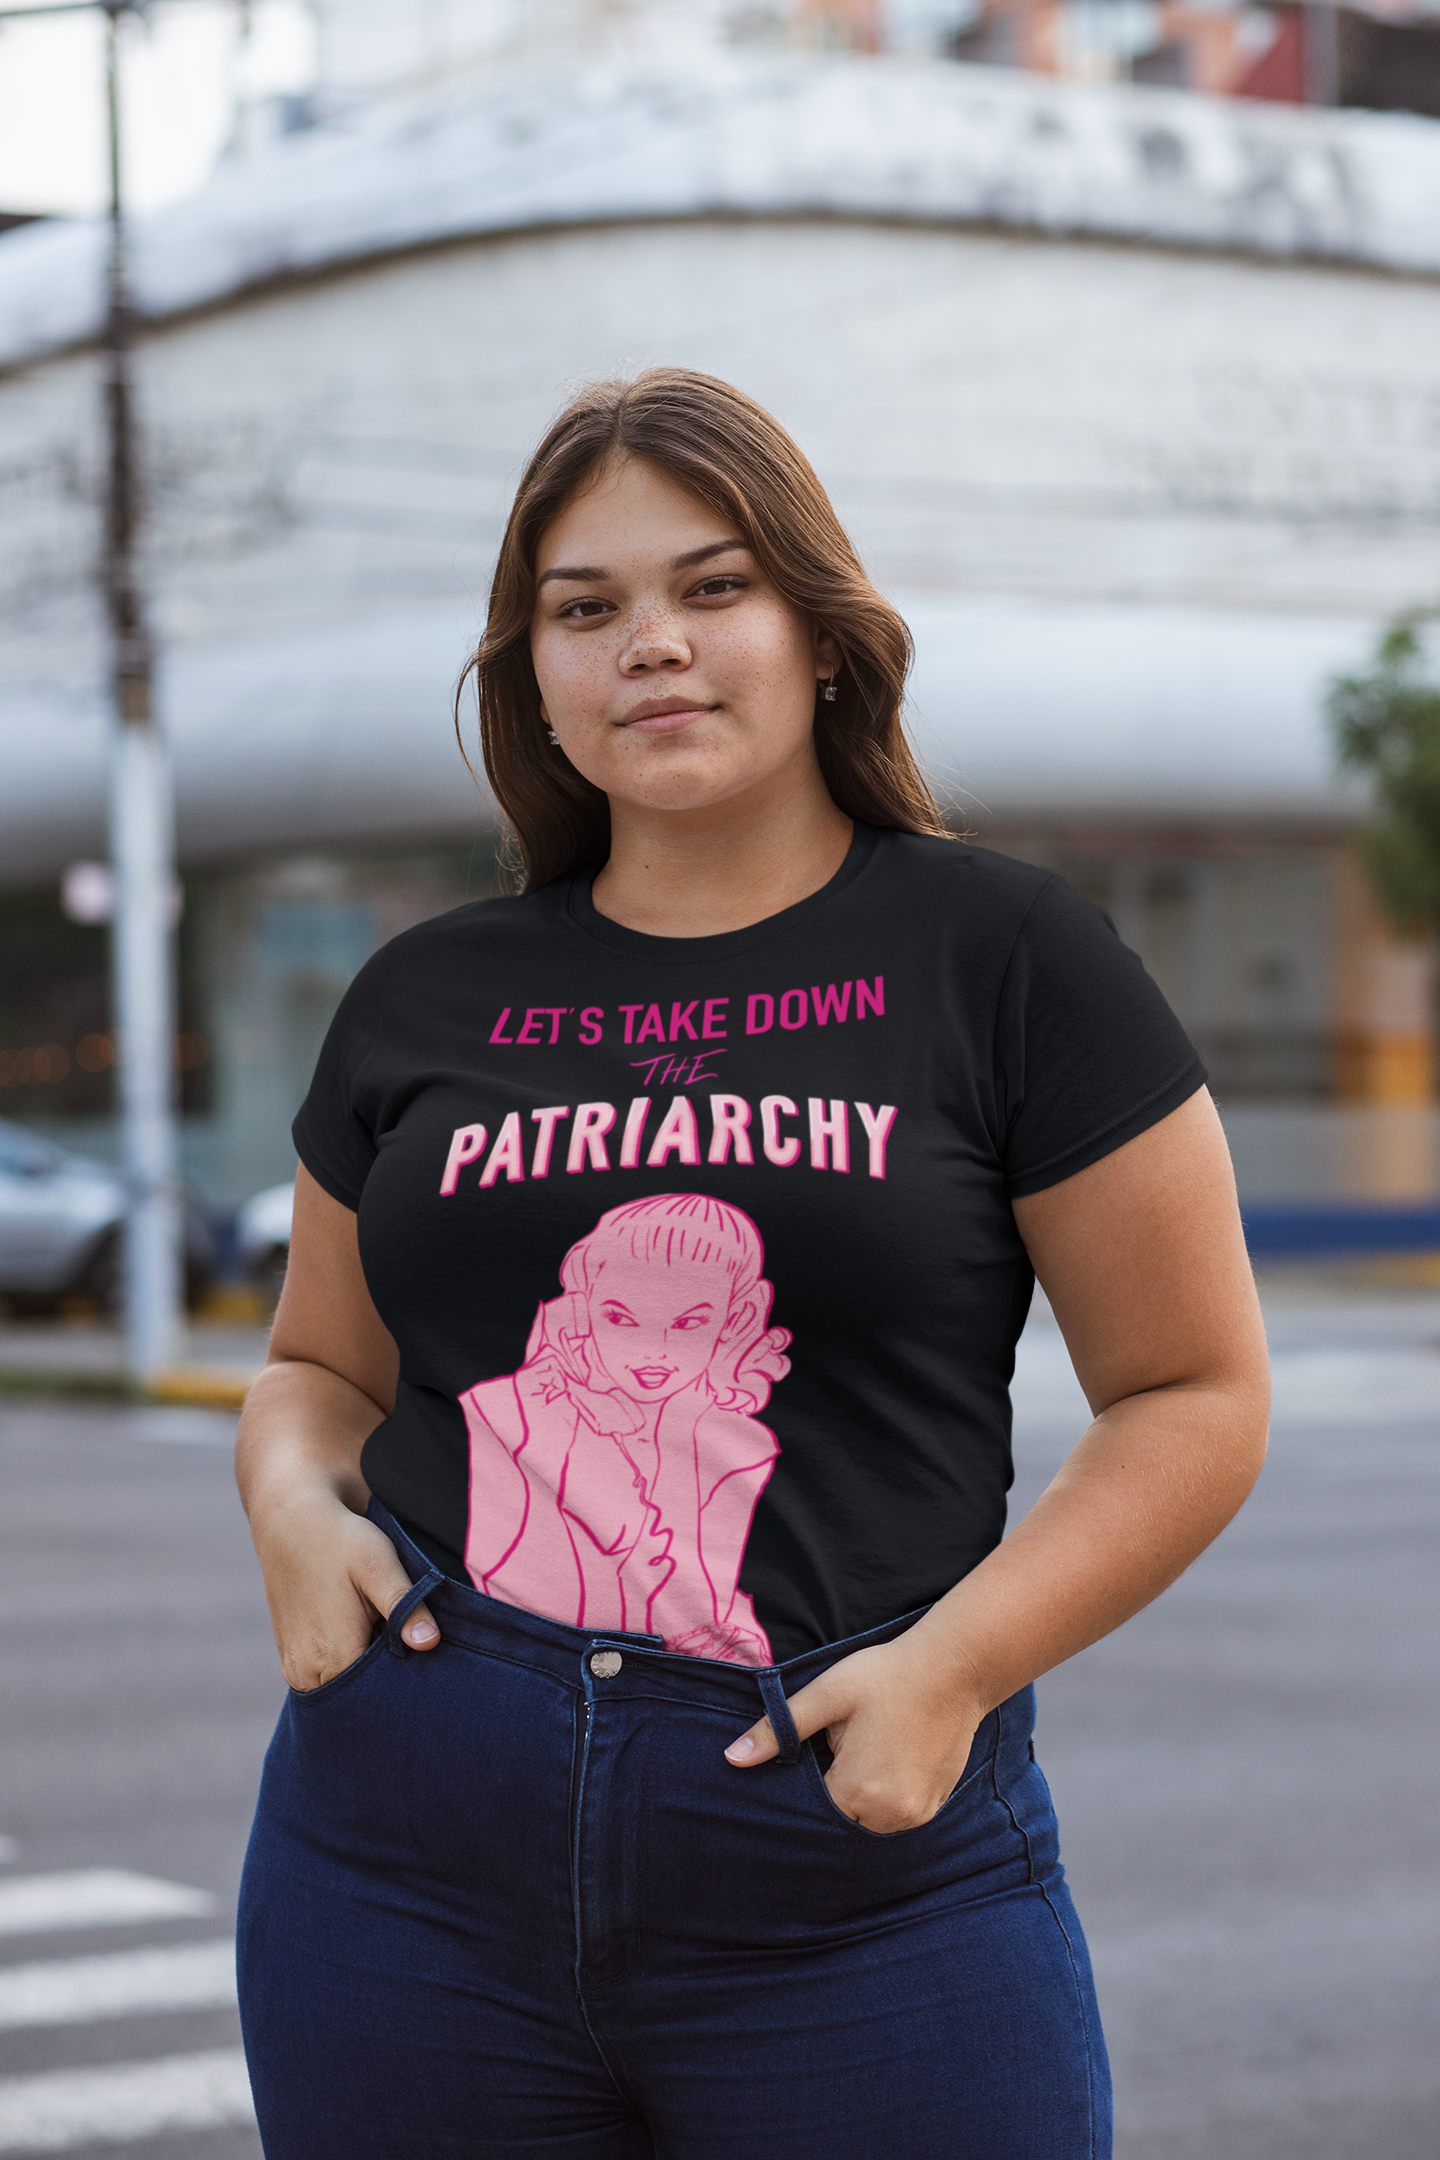 Let's Smash The Patriarchy Fairtrade Organic Cotton Tee in Black or White